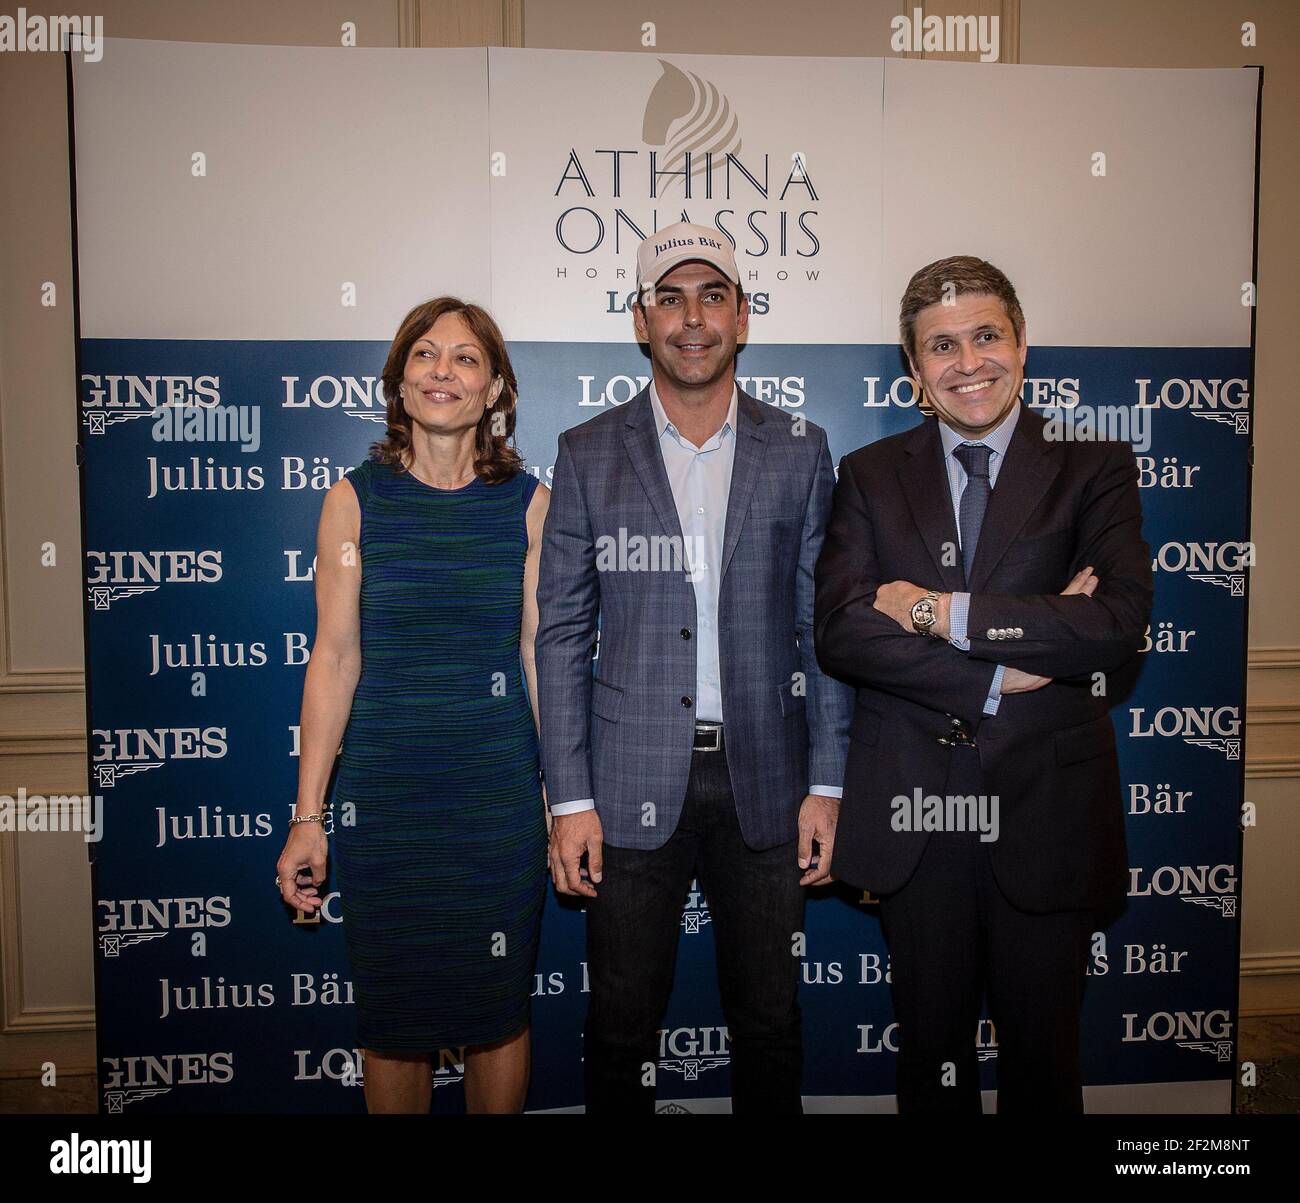 Mrs SQUECCO (JULIUS BEAR BANK), ALVARO DE MIRANDA (Rider) and MR JUAN-CARLOS CAPELLI (LONGINES INTERNATIONAL MARKETING DIRECTOR), during the Press conference at the Bristol hotel in Paris, France, on May 21, 2014 for the Longines Athina Onassis Horse Show in June 5th-7th in Pampelonne beach, Saint Tropez, France - Photo Christophe Bricot / DPPI Stock Photo